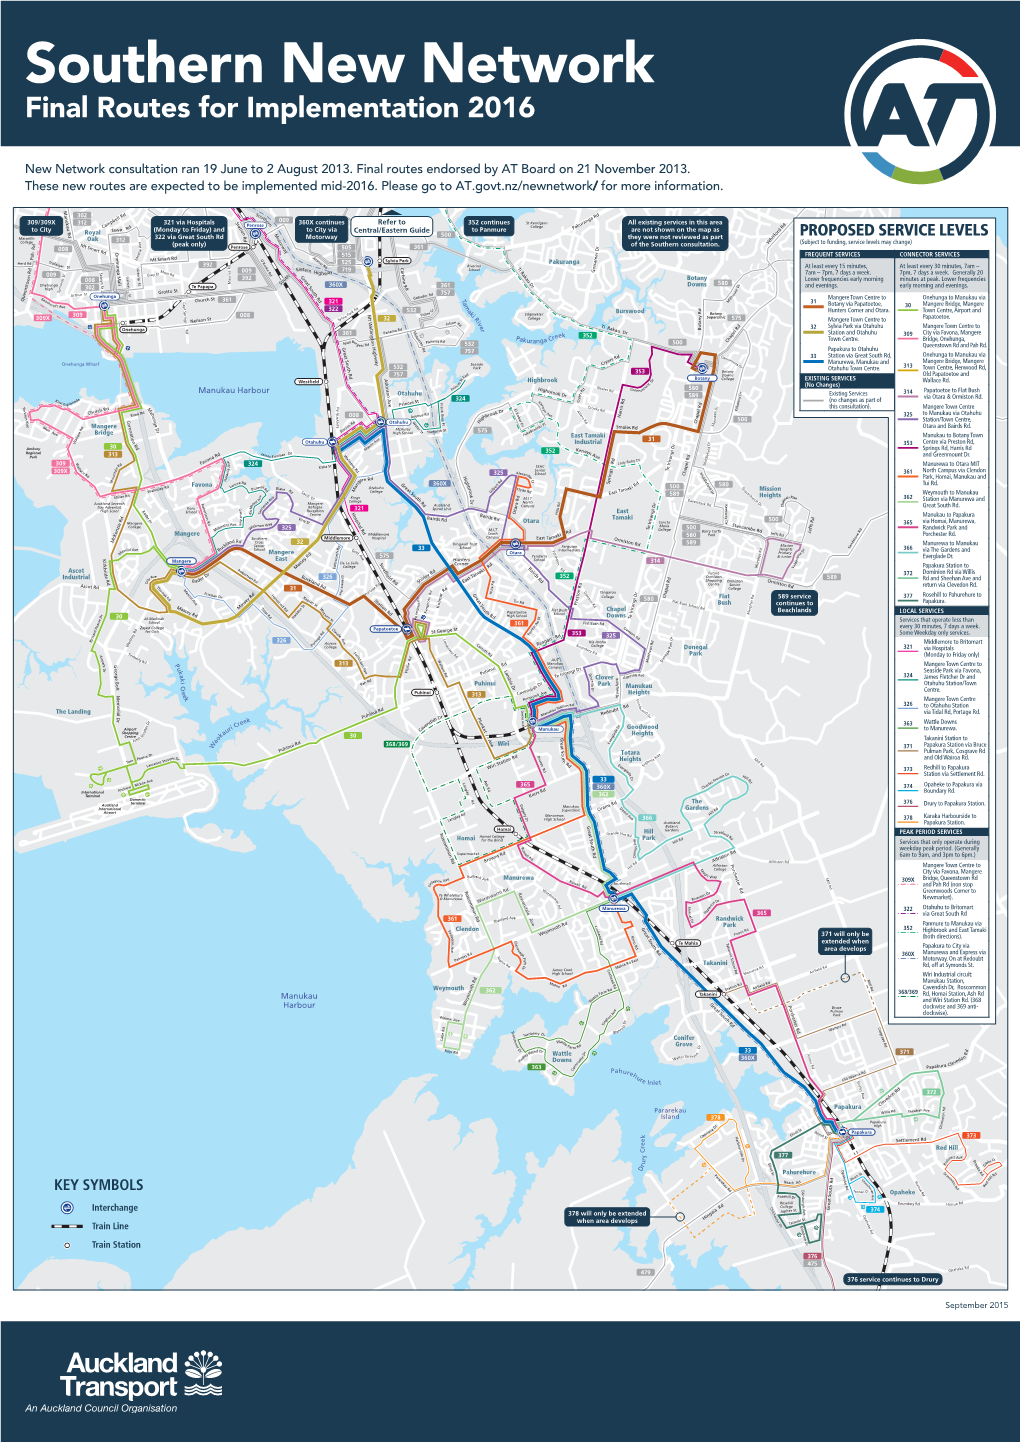 Southern New Network Final Routes for Implementation 2016